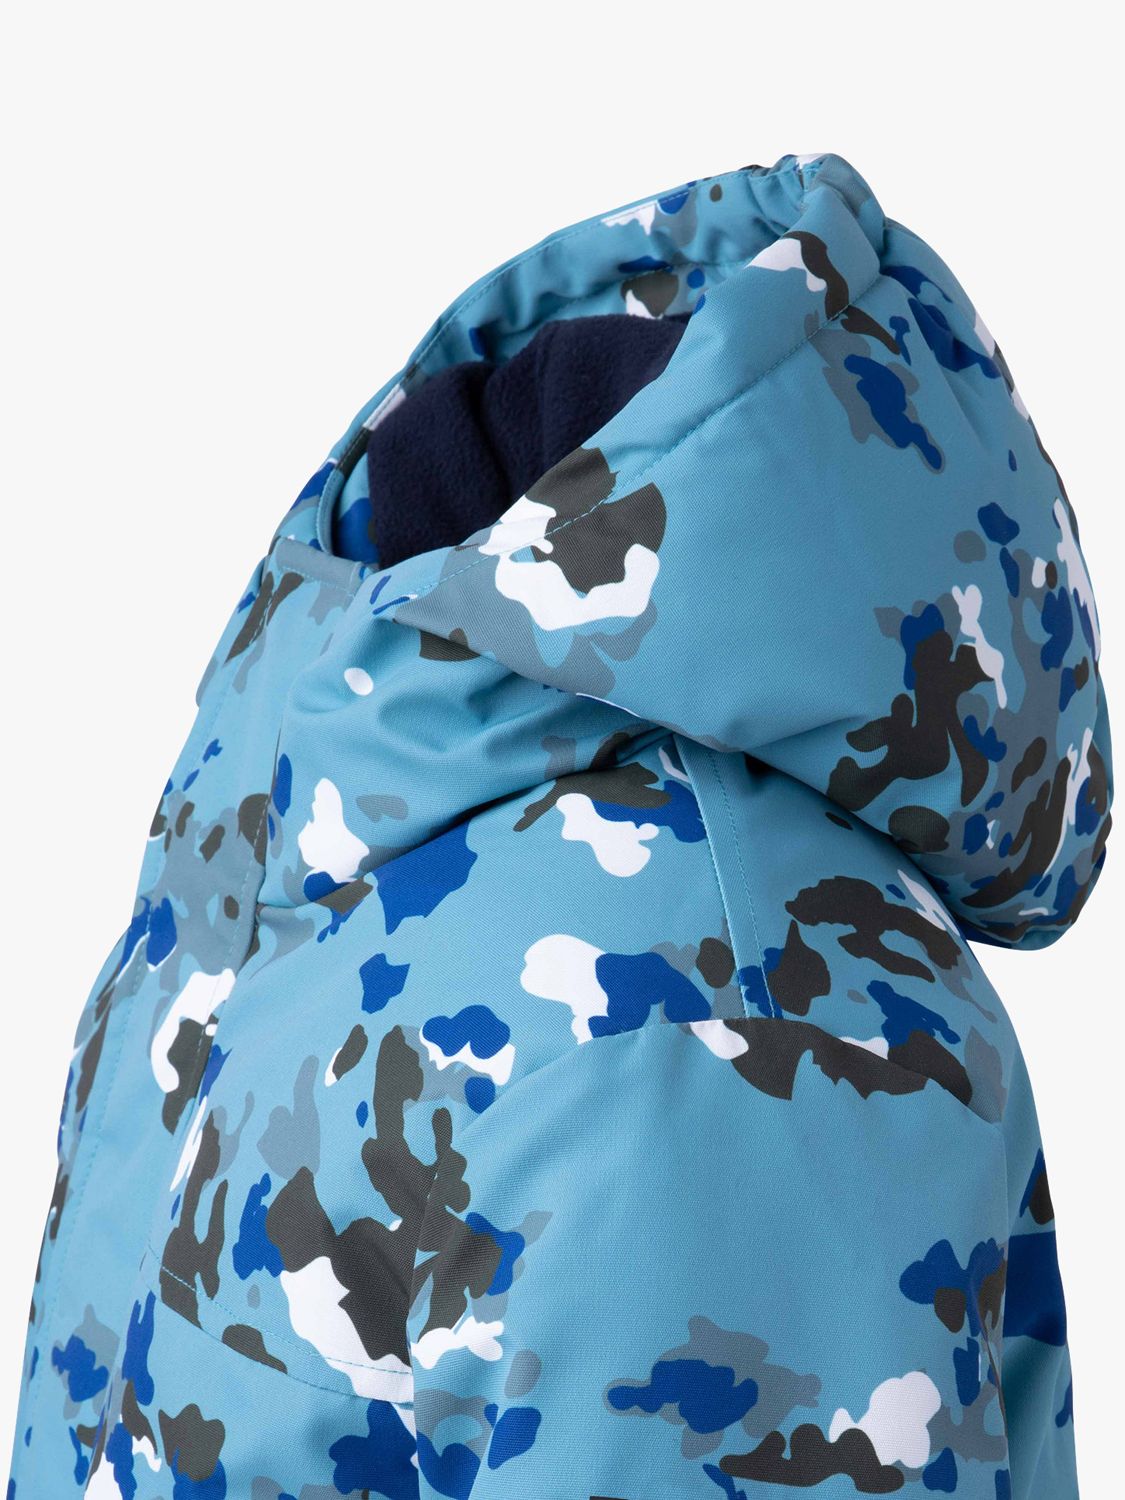 Aigle Kids' Abstract Camouflage Waterproof Parka Coat, Blue, 4 years